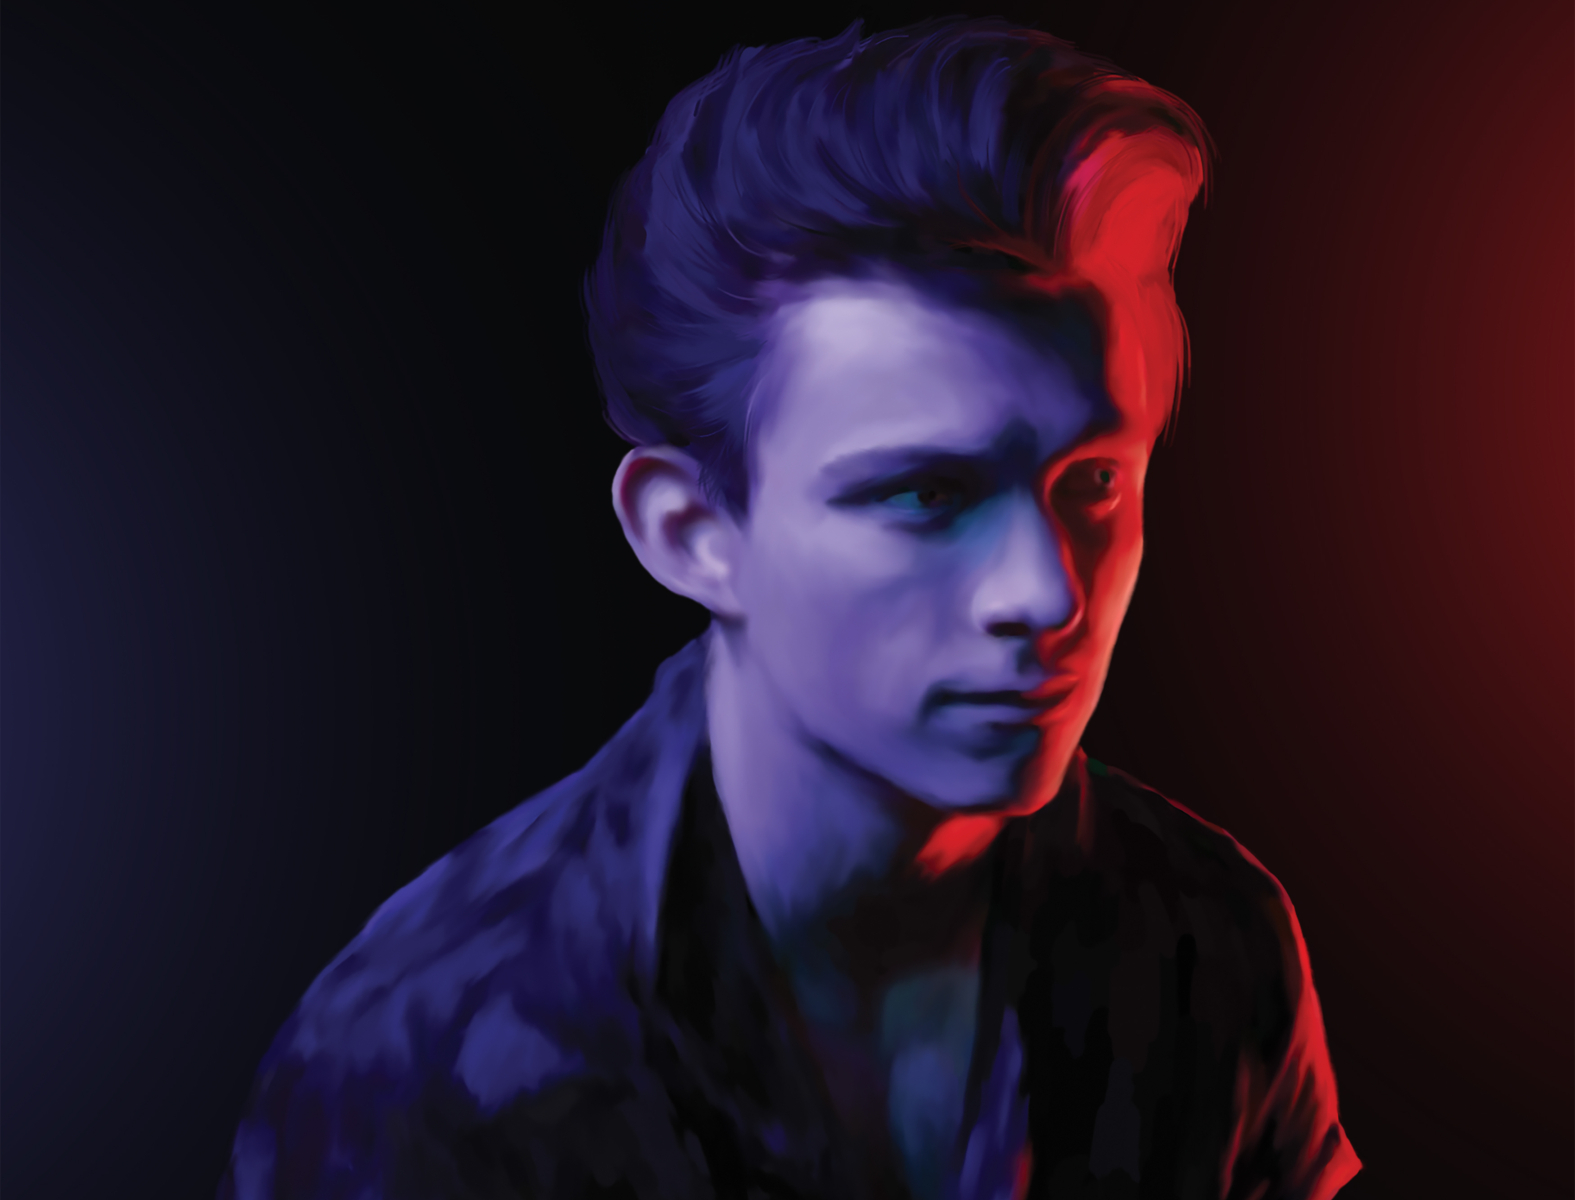 Tom Holland Digital Painting by Chairit Inkleng on Dribbble